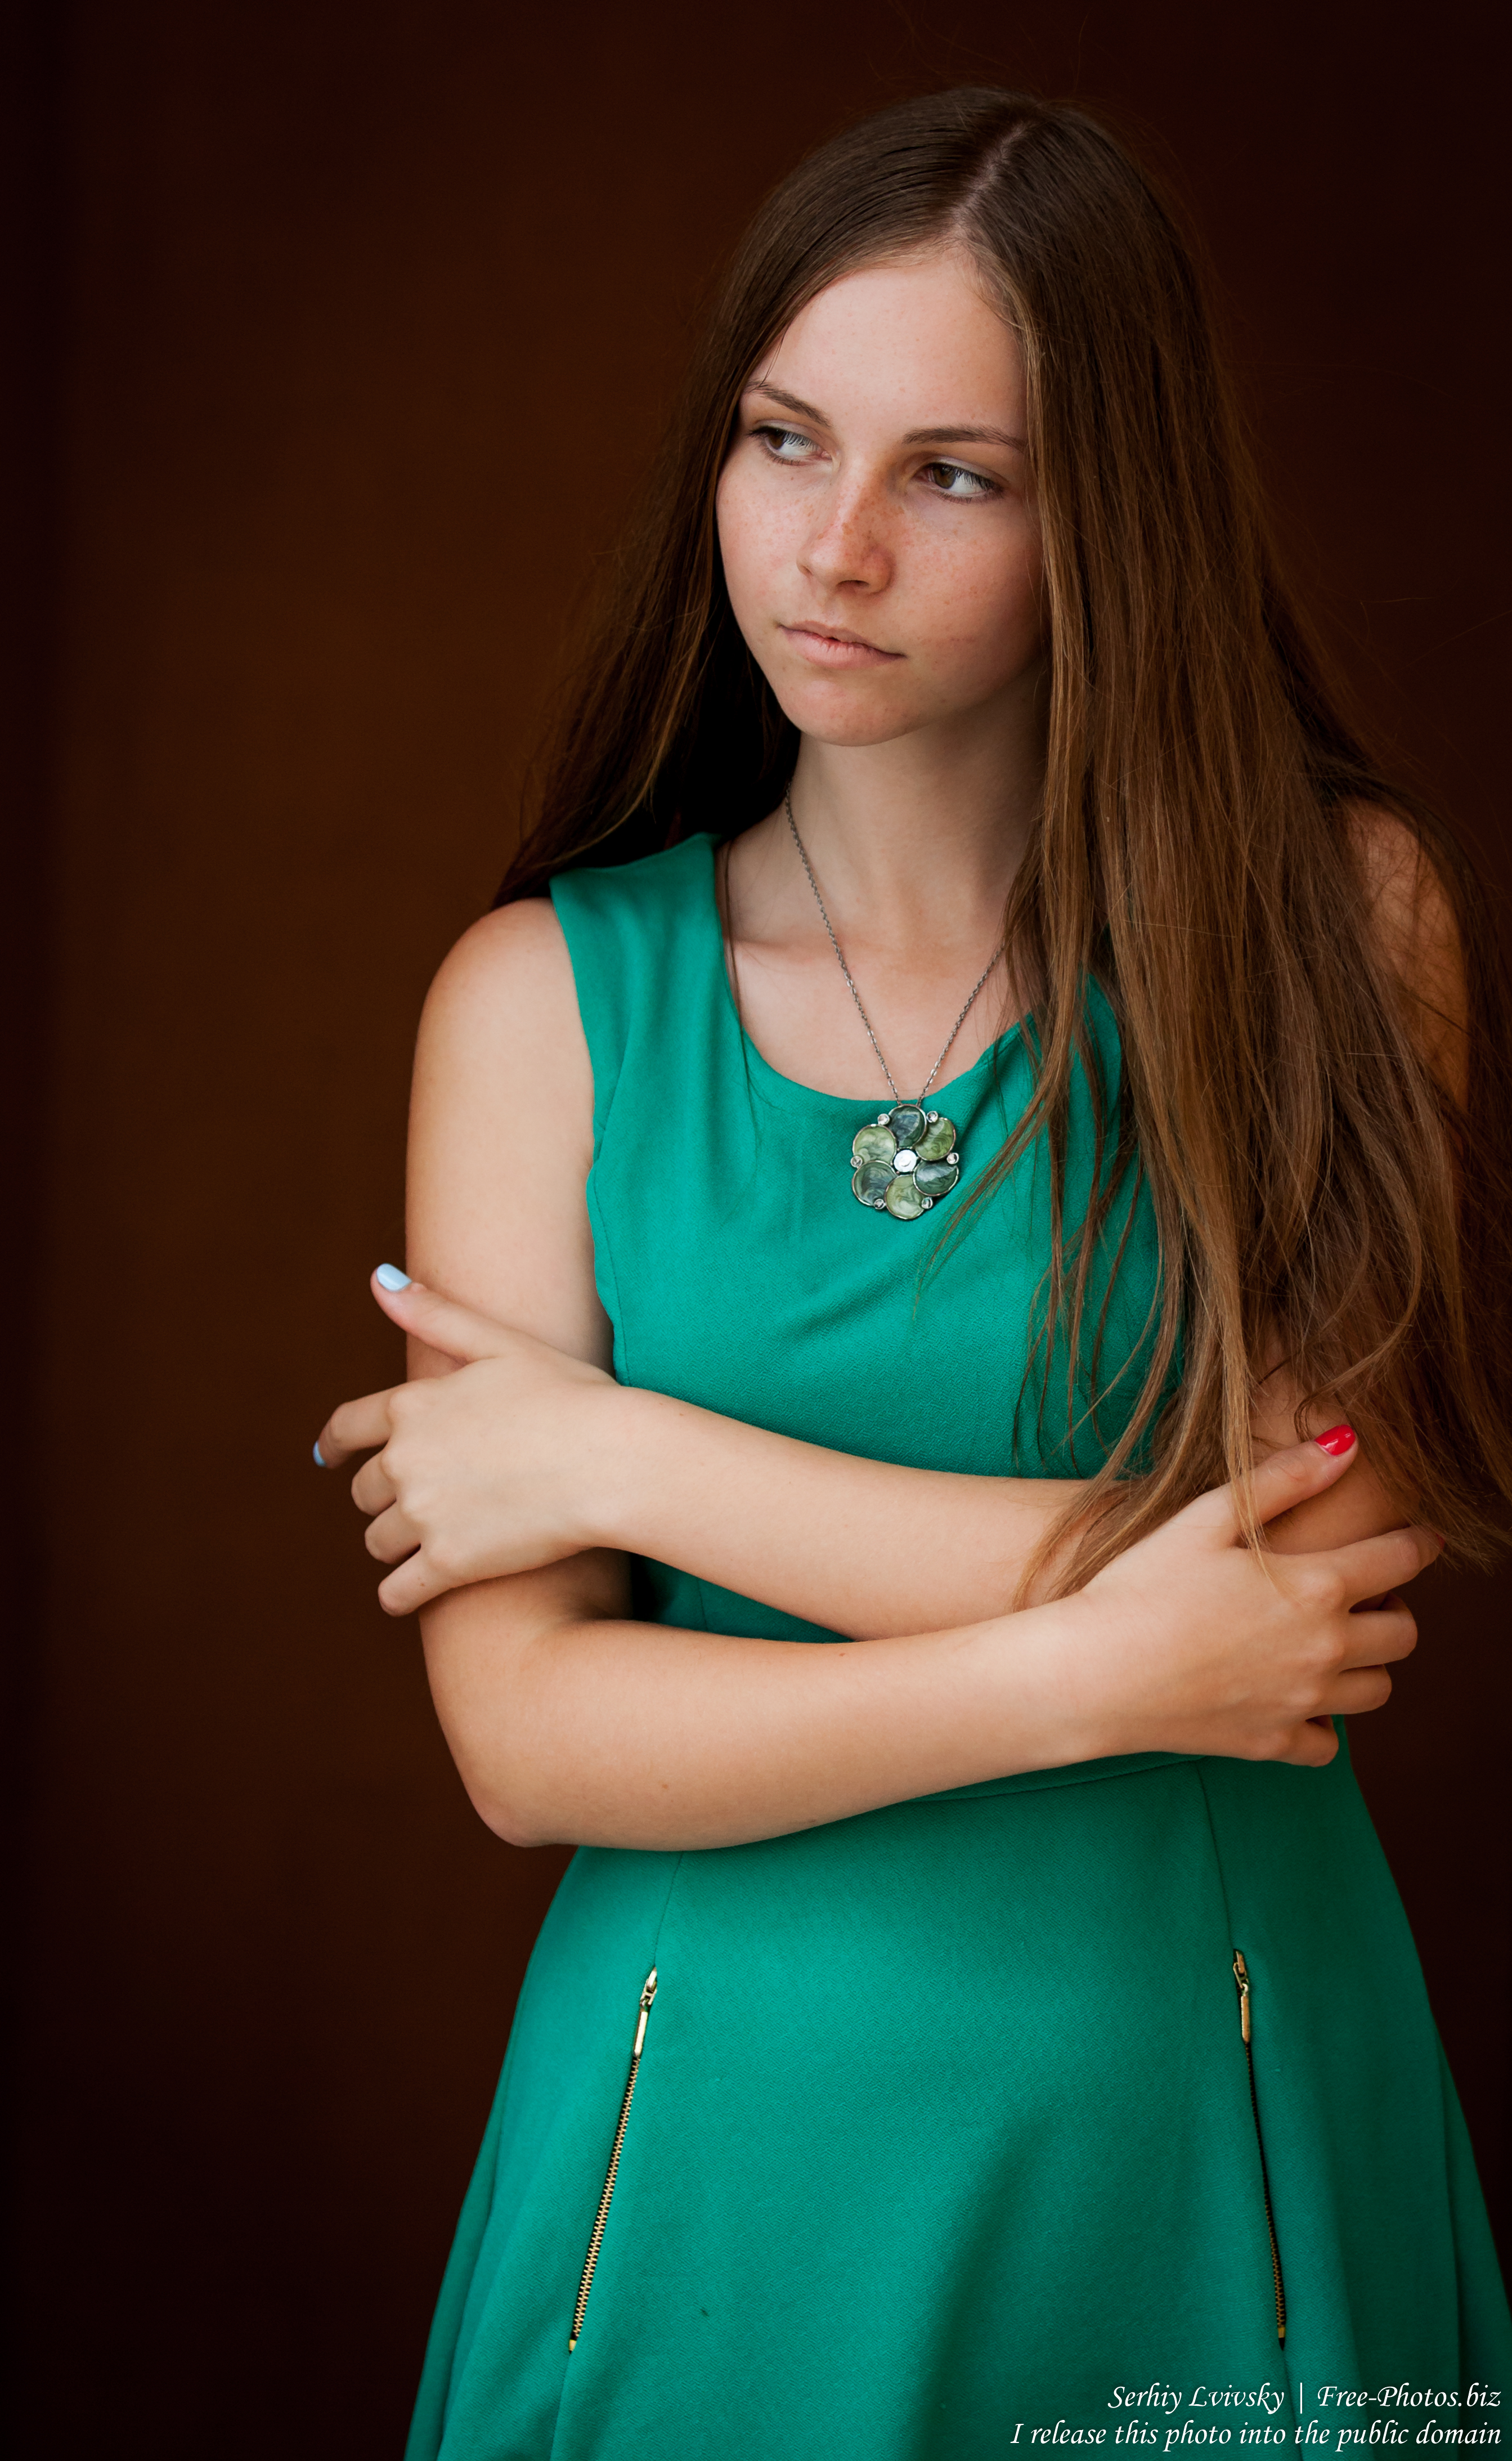 a 14-year-old Catholic girl photographed by Serhiy Lvivsky in August 2015, picture 9